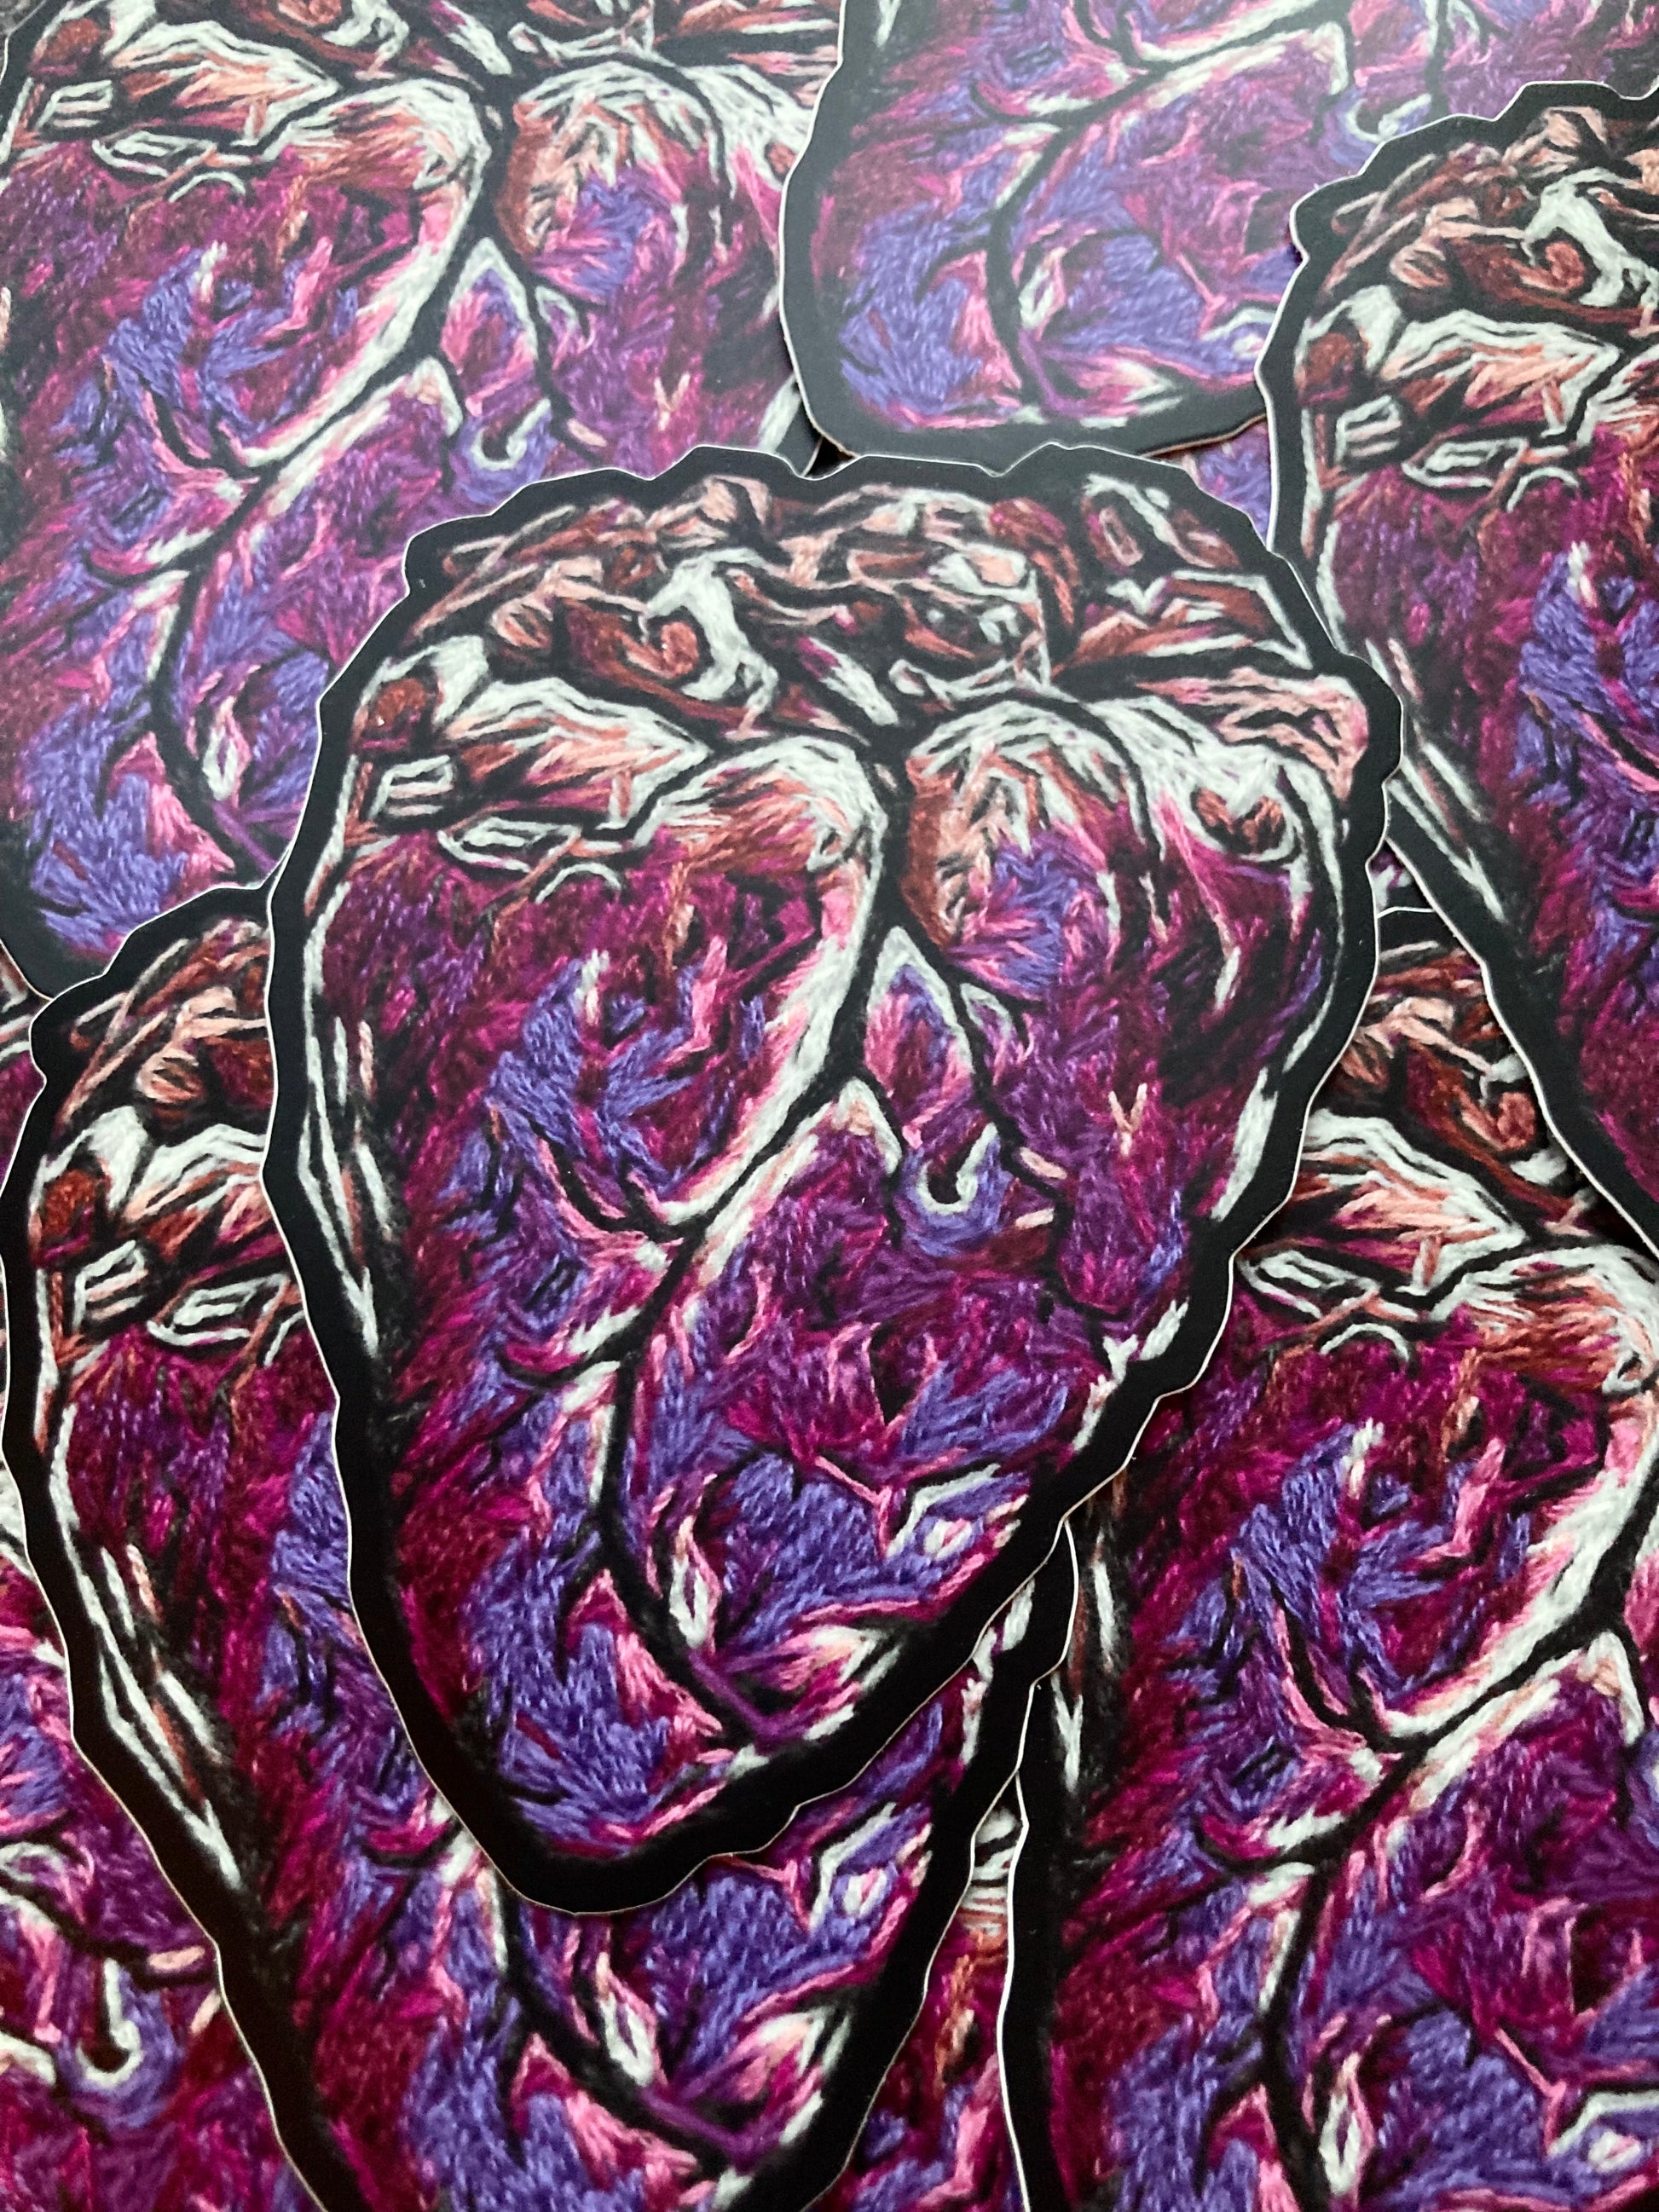 A pile of stickers printed with a graphic embroidered anatomical heart are lying on a dark surface. The heart has bright pink and purple tones, with white and beige highlights, and a dark black outline. 